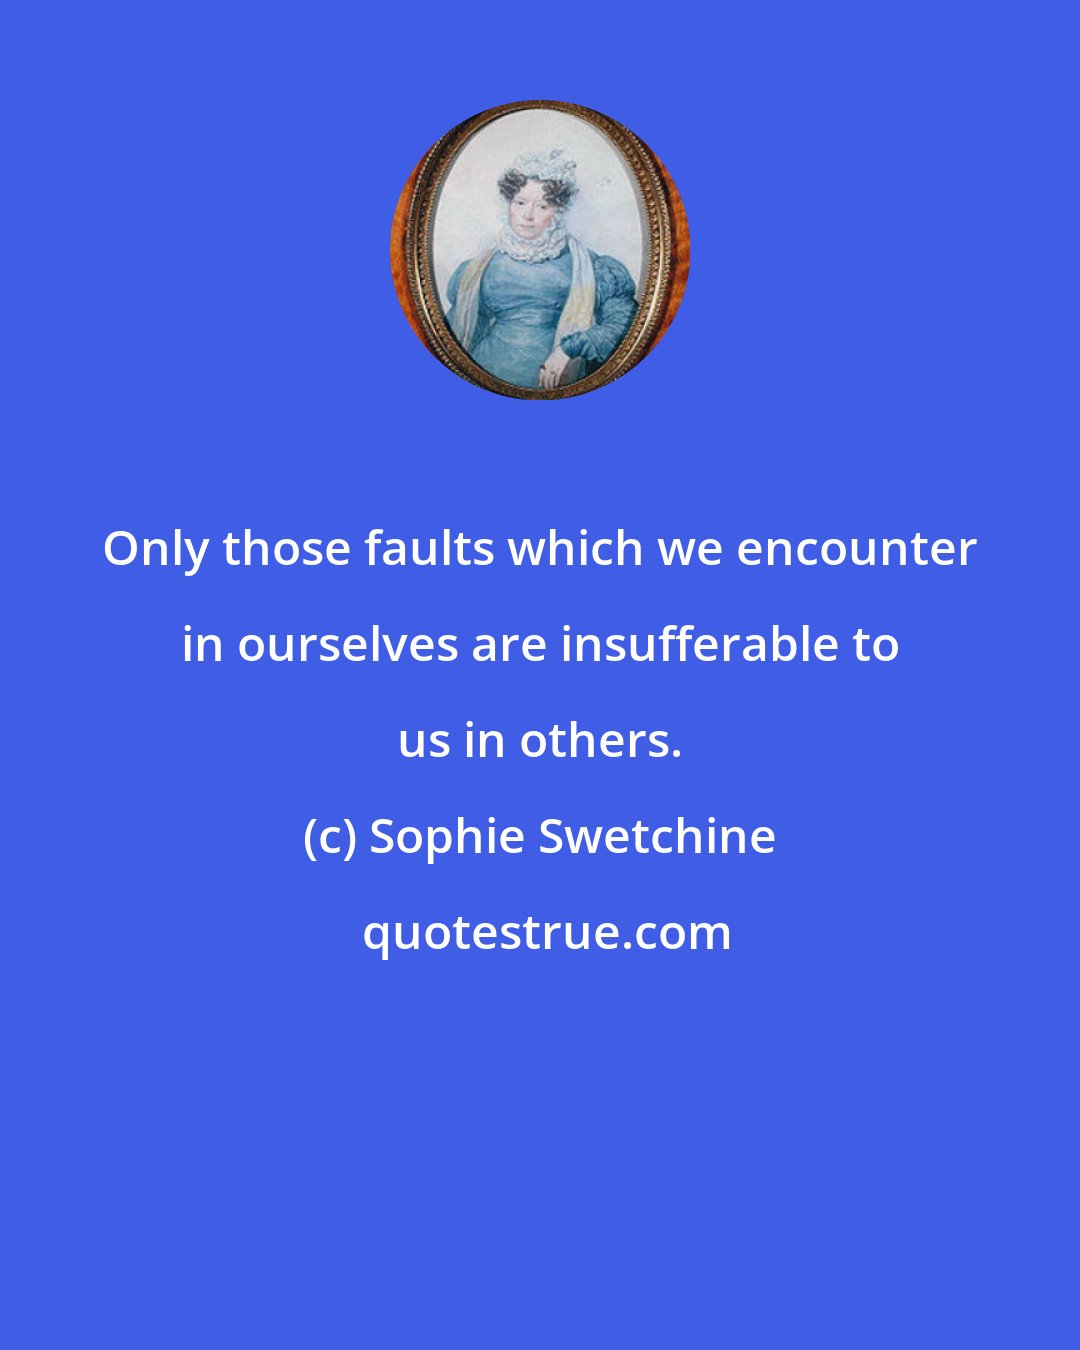 Sophie Swetchine: Only those faults which we encounter in ourselves are insufferable to us in others.